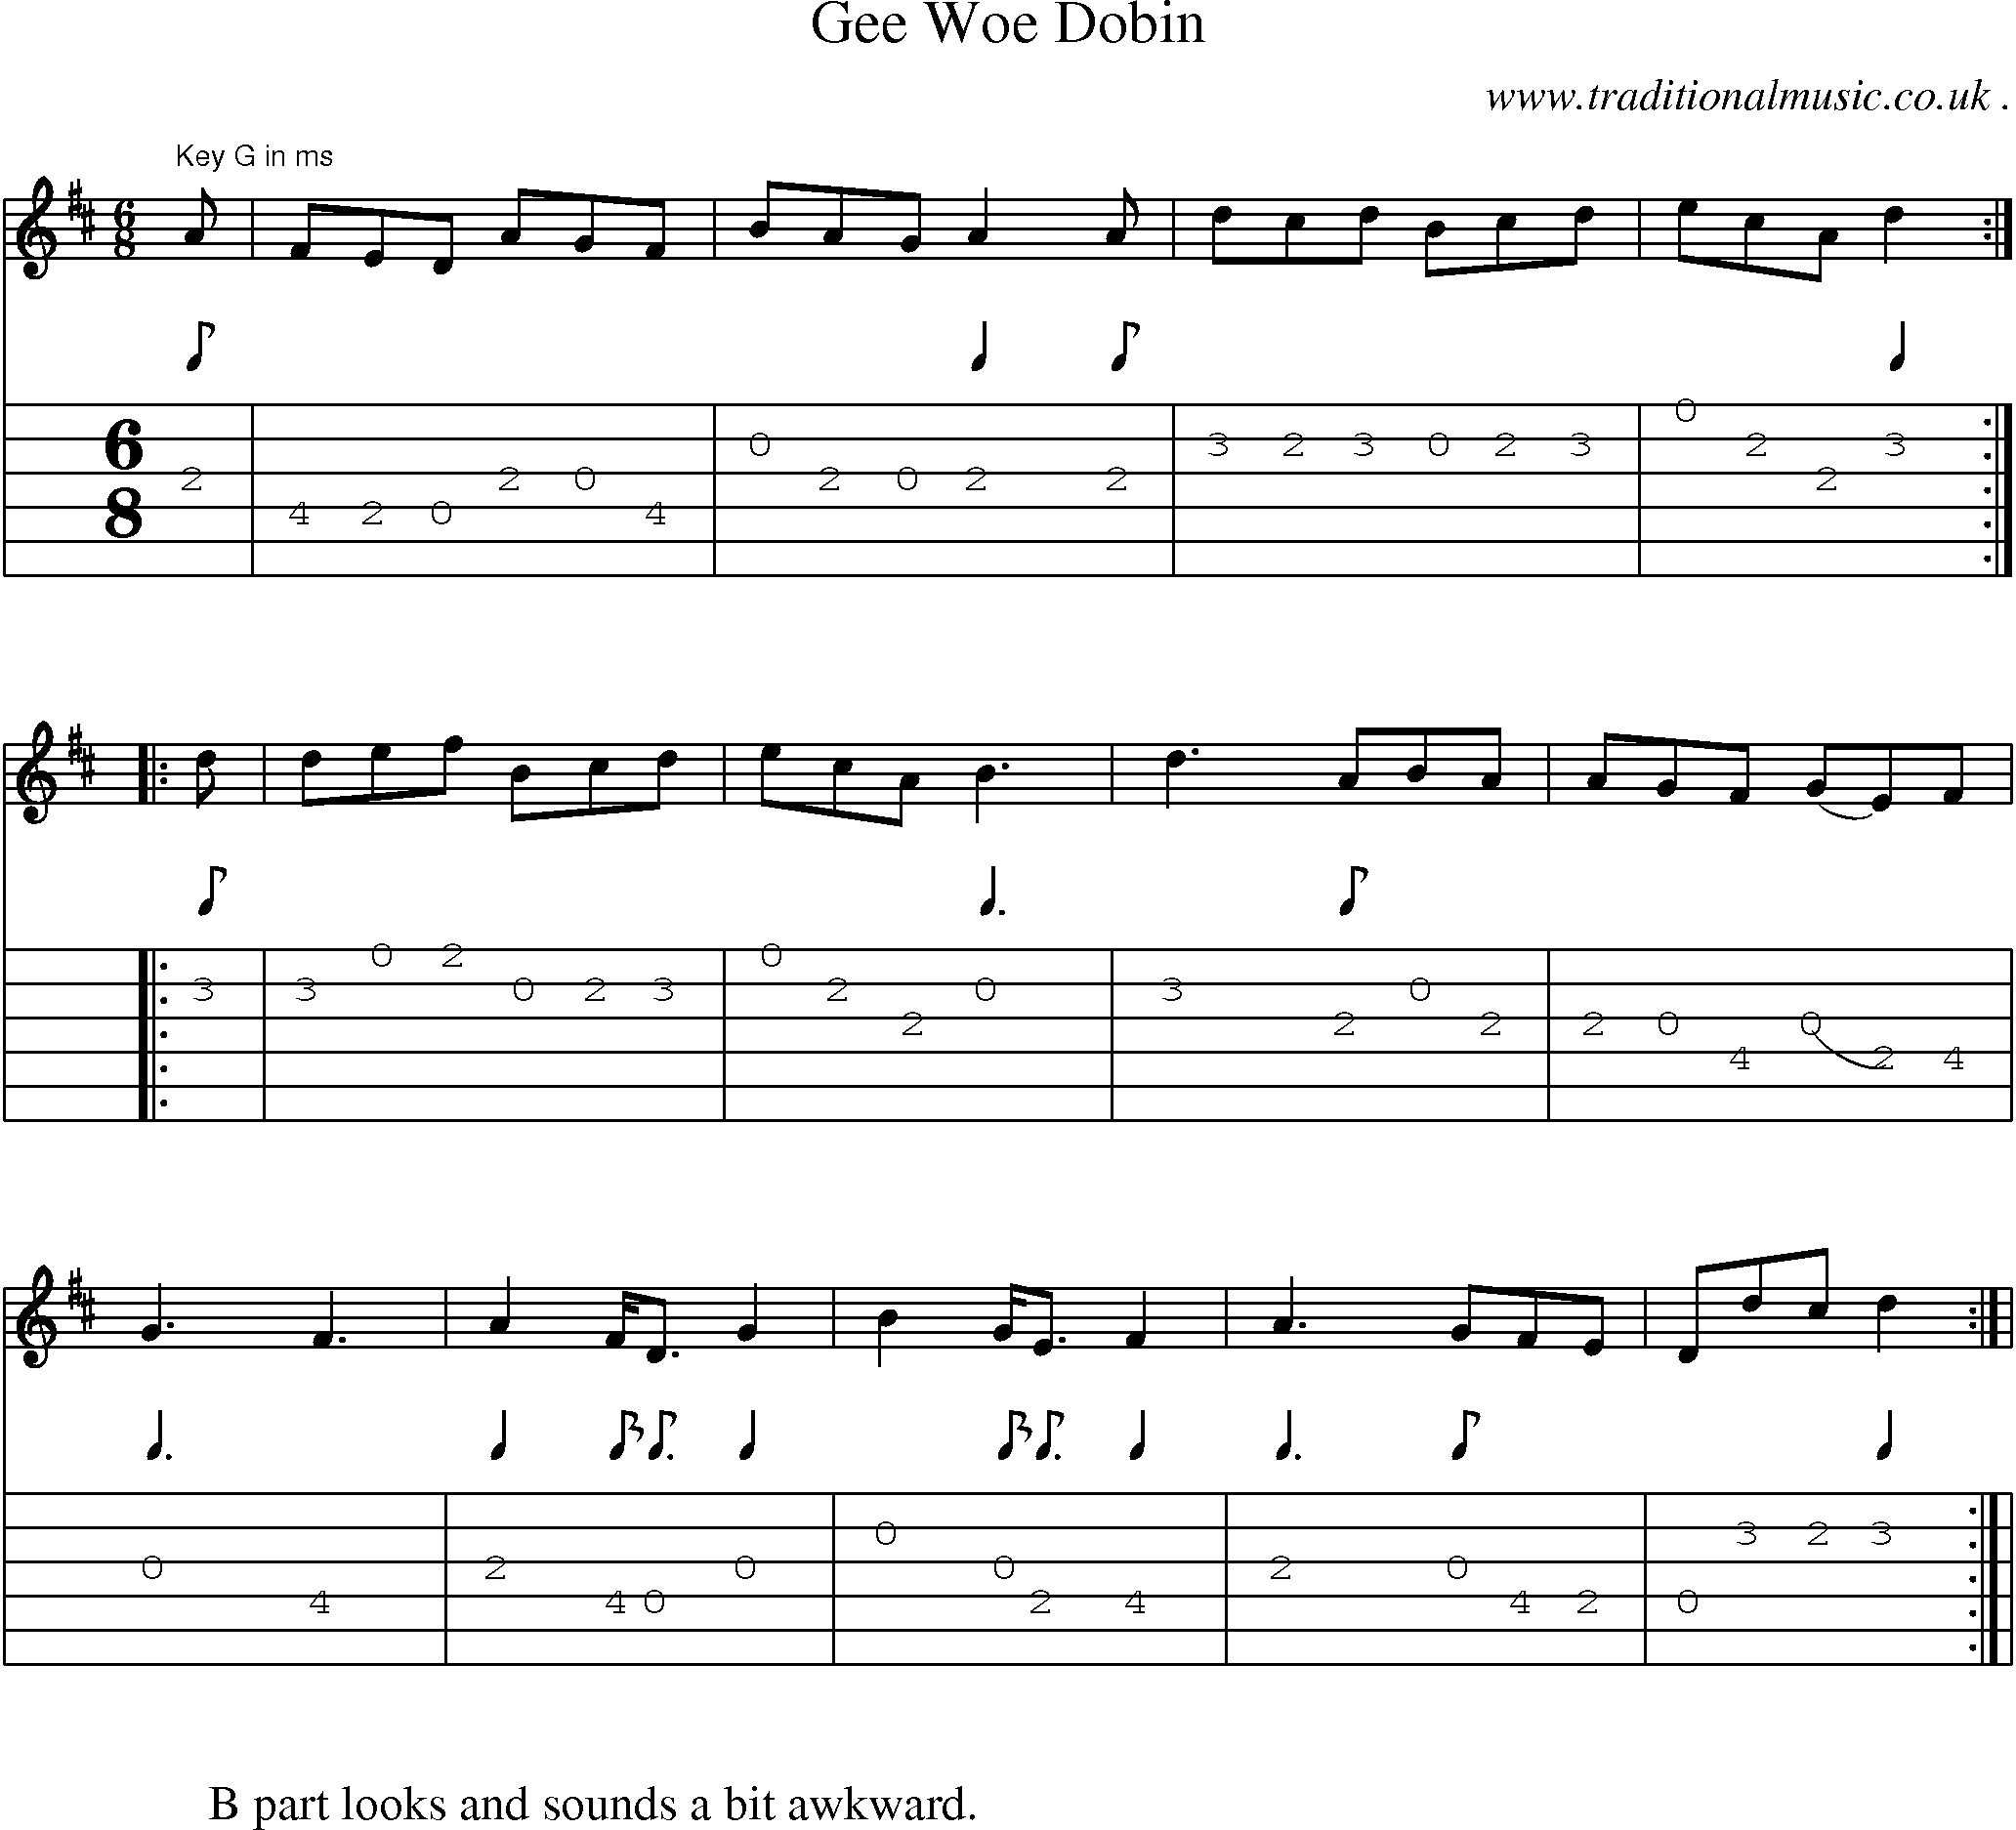 Sheet-Music and Guitar Tabs for Gee Woe Dobin